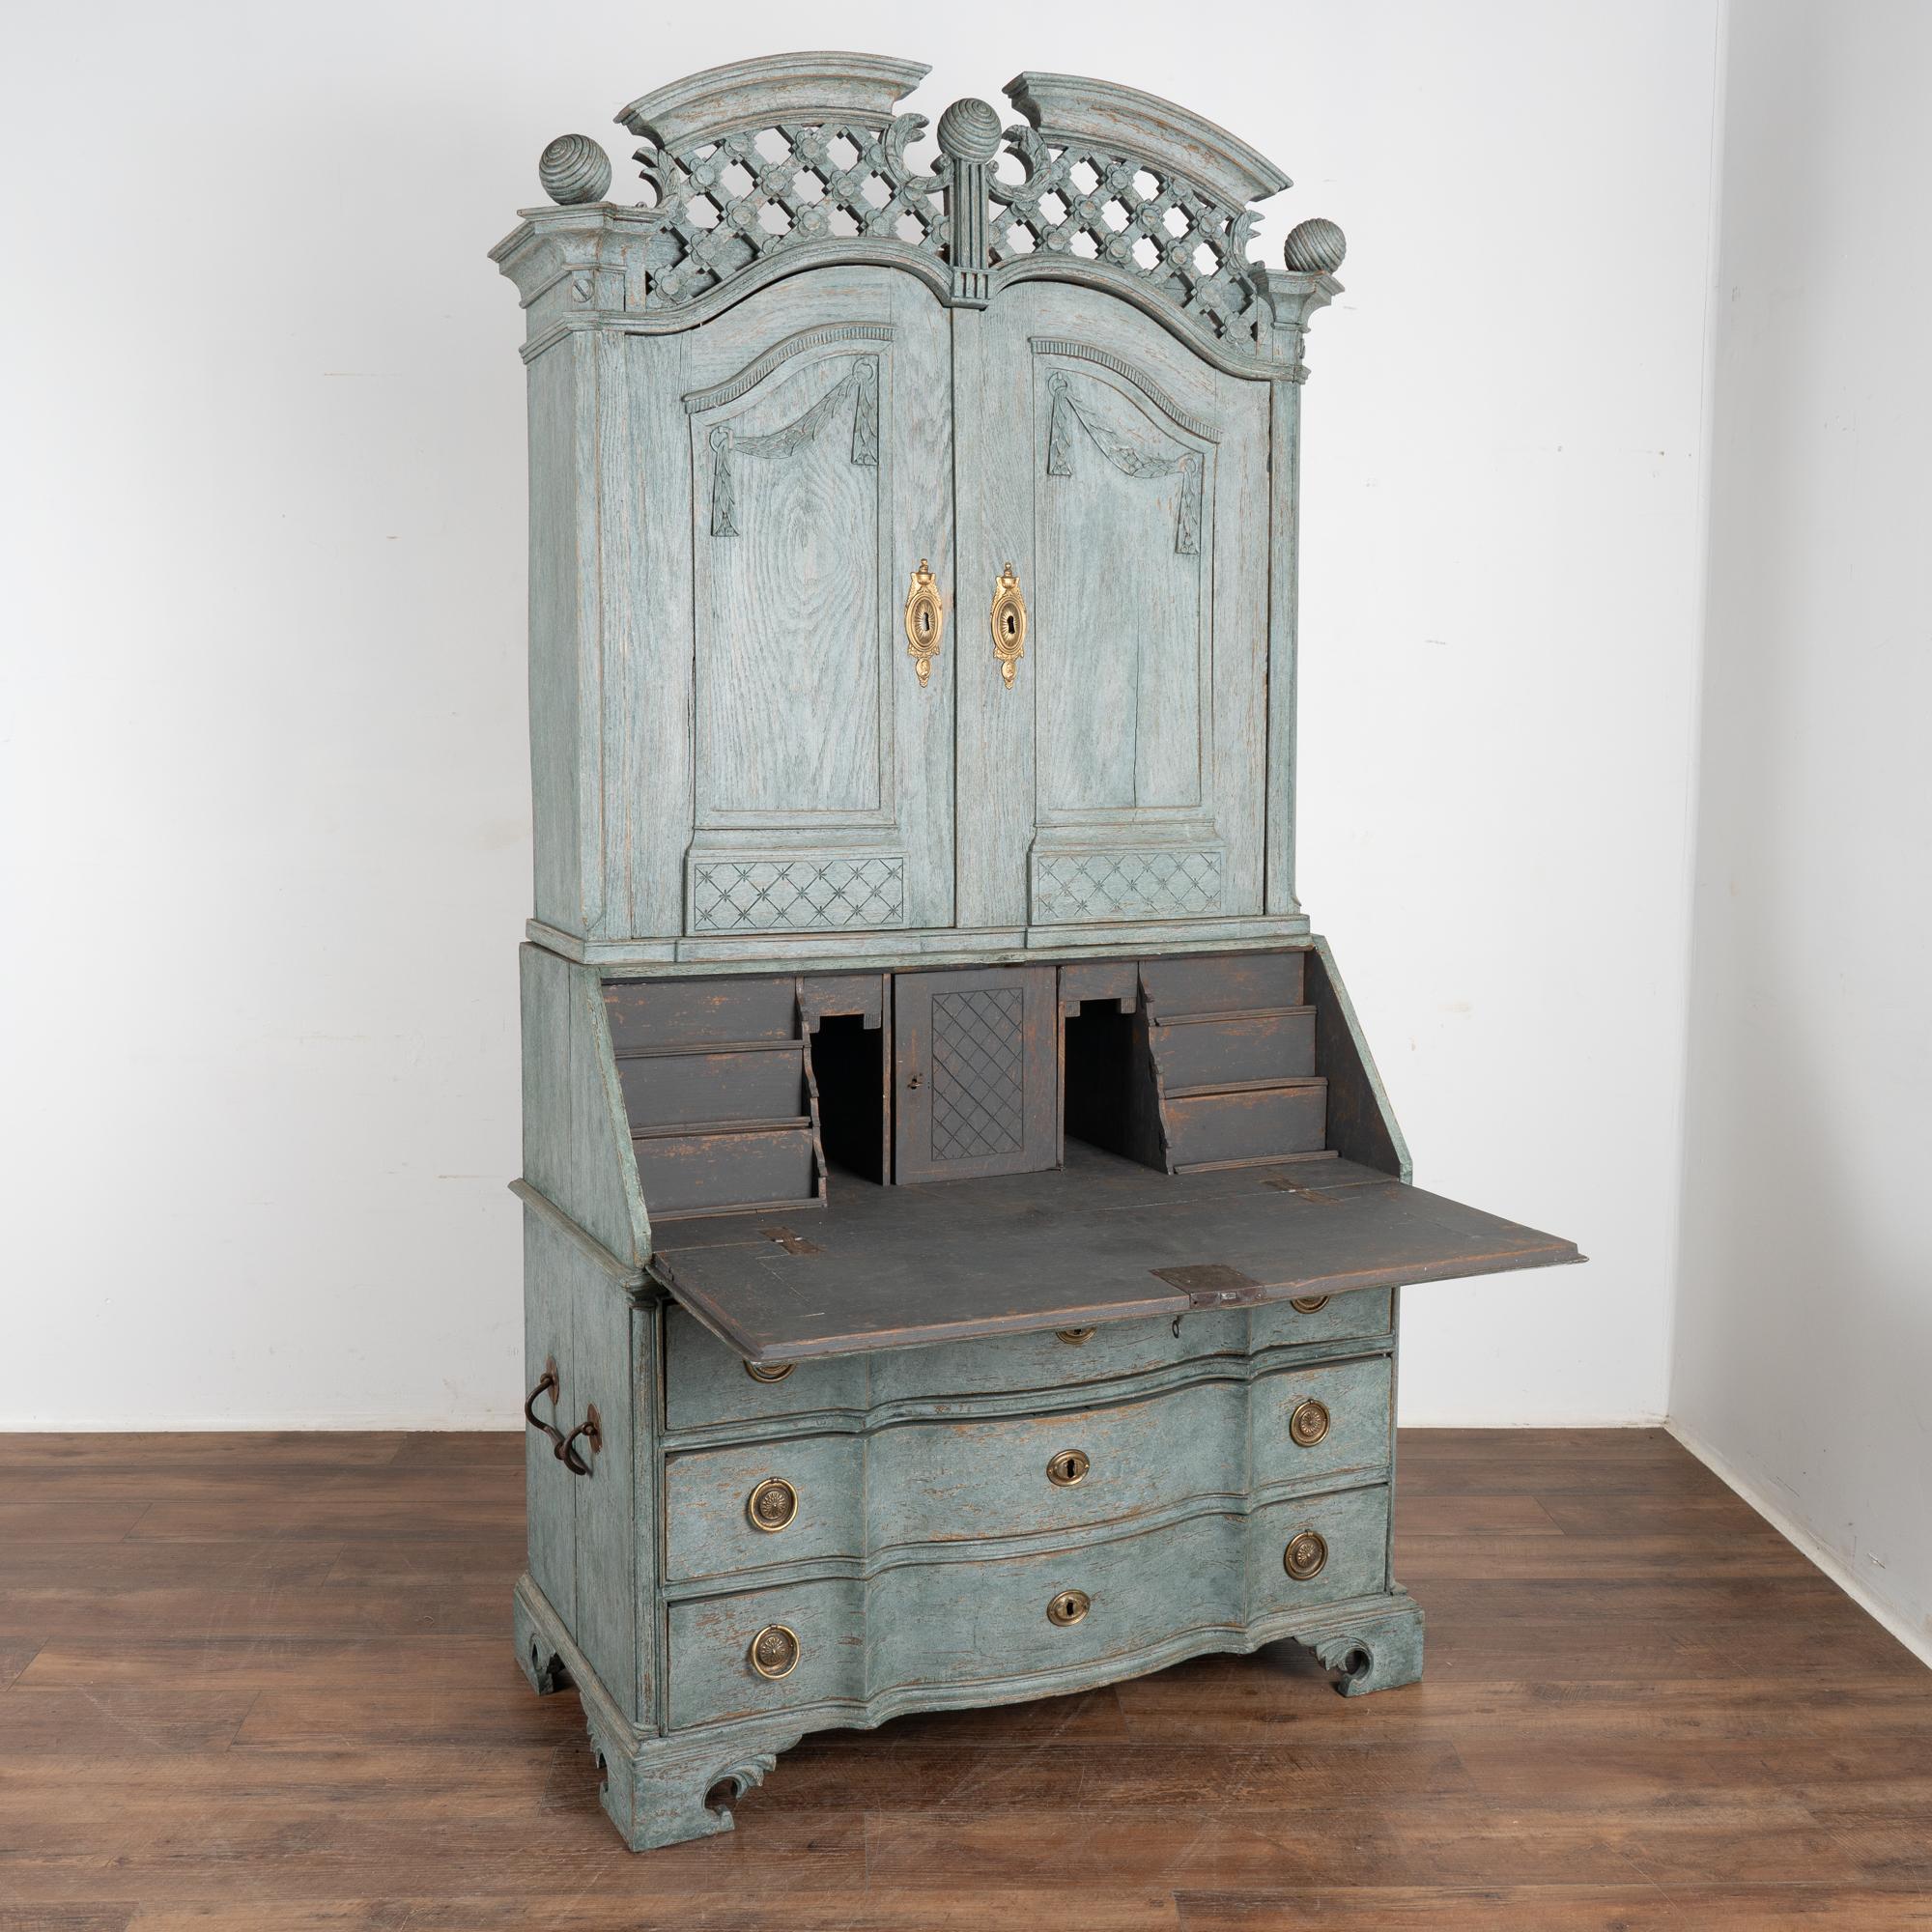 This striking oak secretary is an elegant statement piece crowned with an elaborate latticework bonnet and finials.
The entire secretary has been given a professional custom layered blue painted finish which has been gently distressed to reveal the